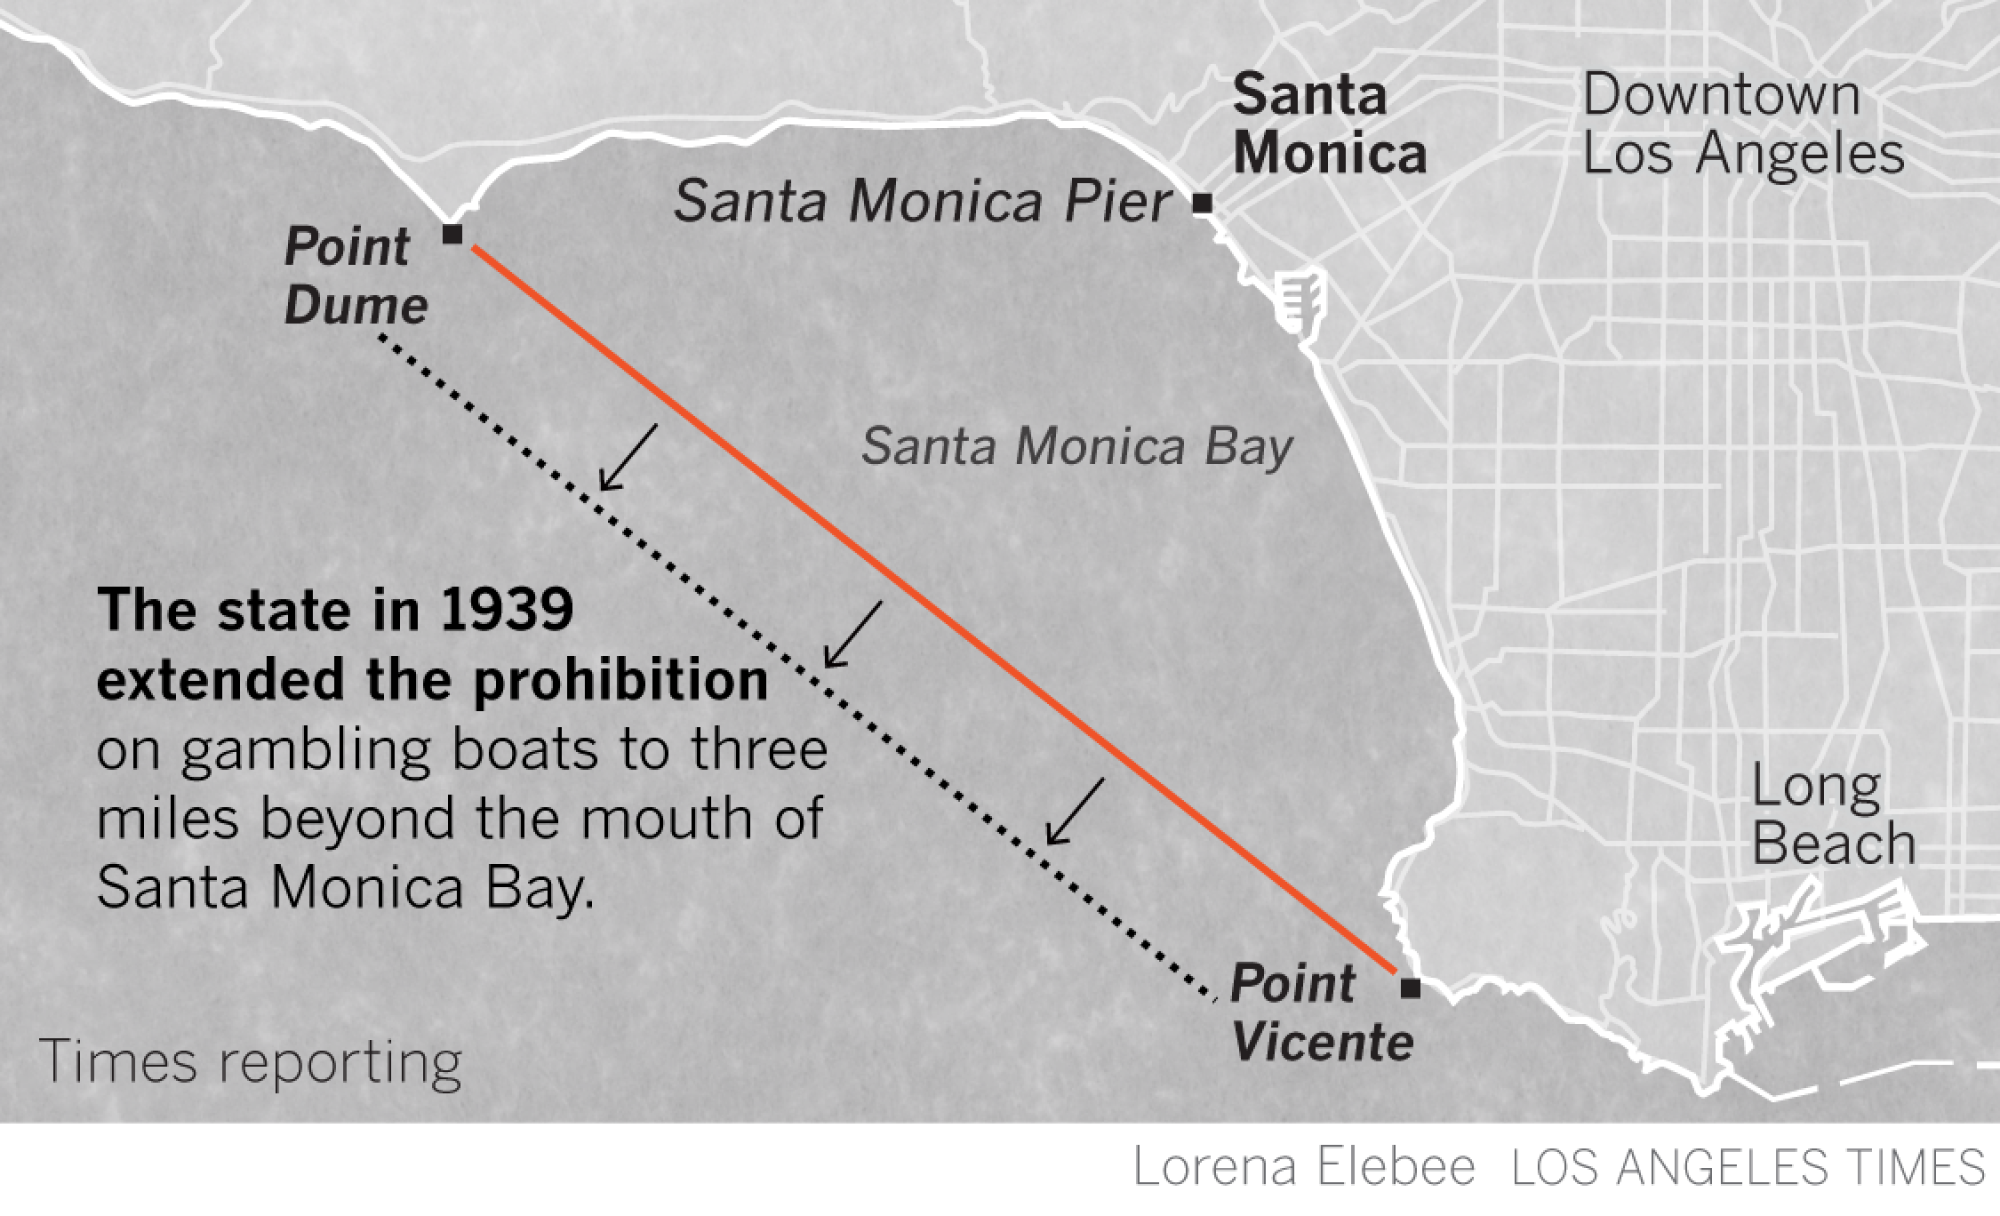 Map shows state extended gambling boat prohibition to 3 nautical miles beyond the mouth of Santa Monica Bay in 1939.